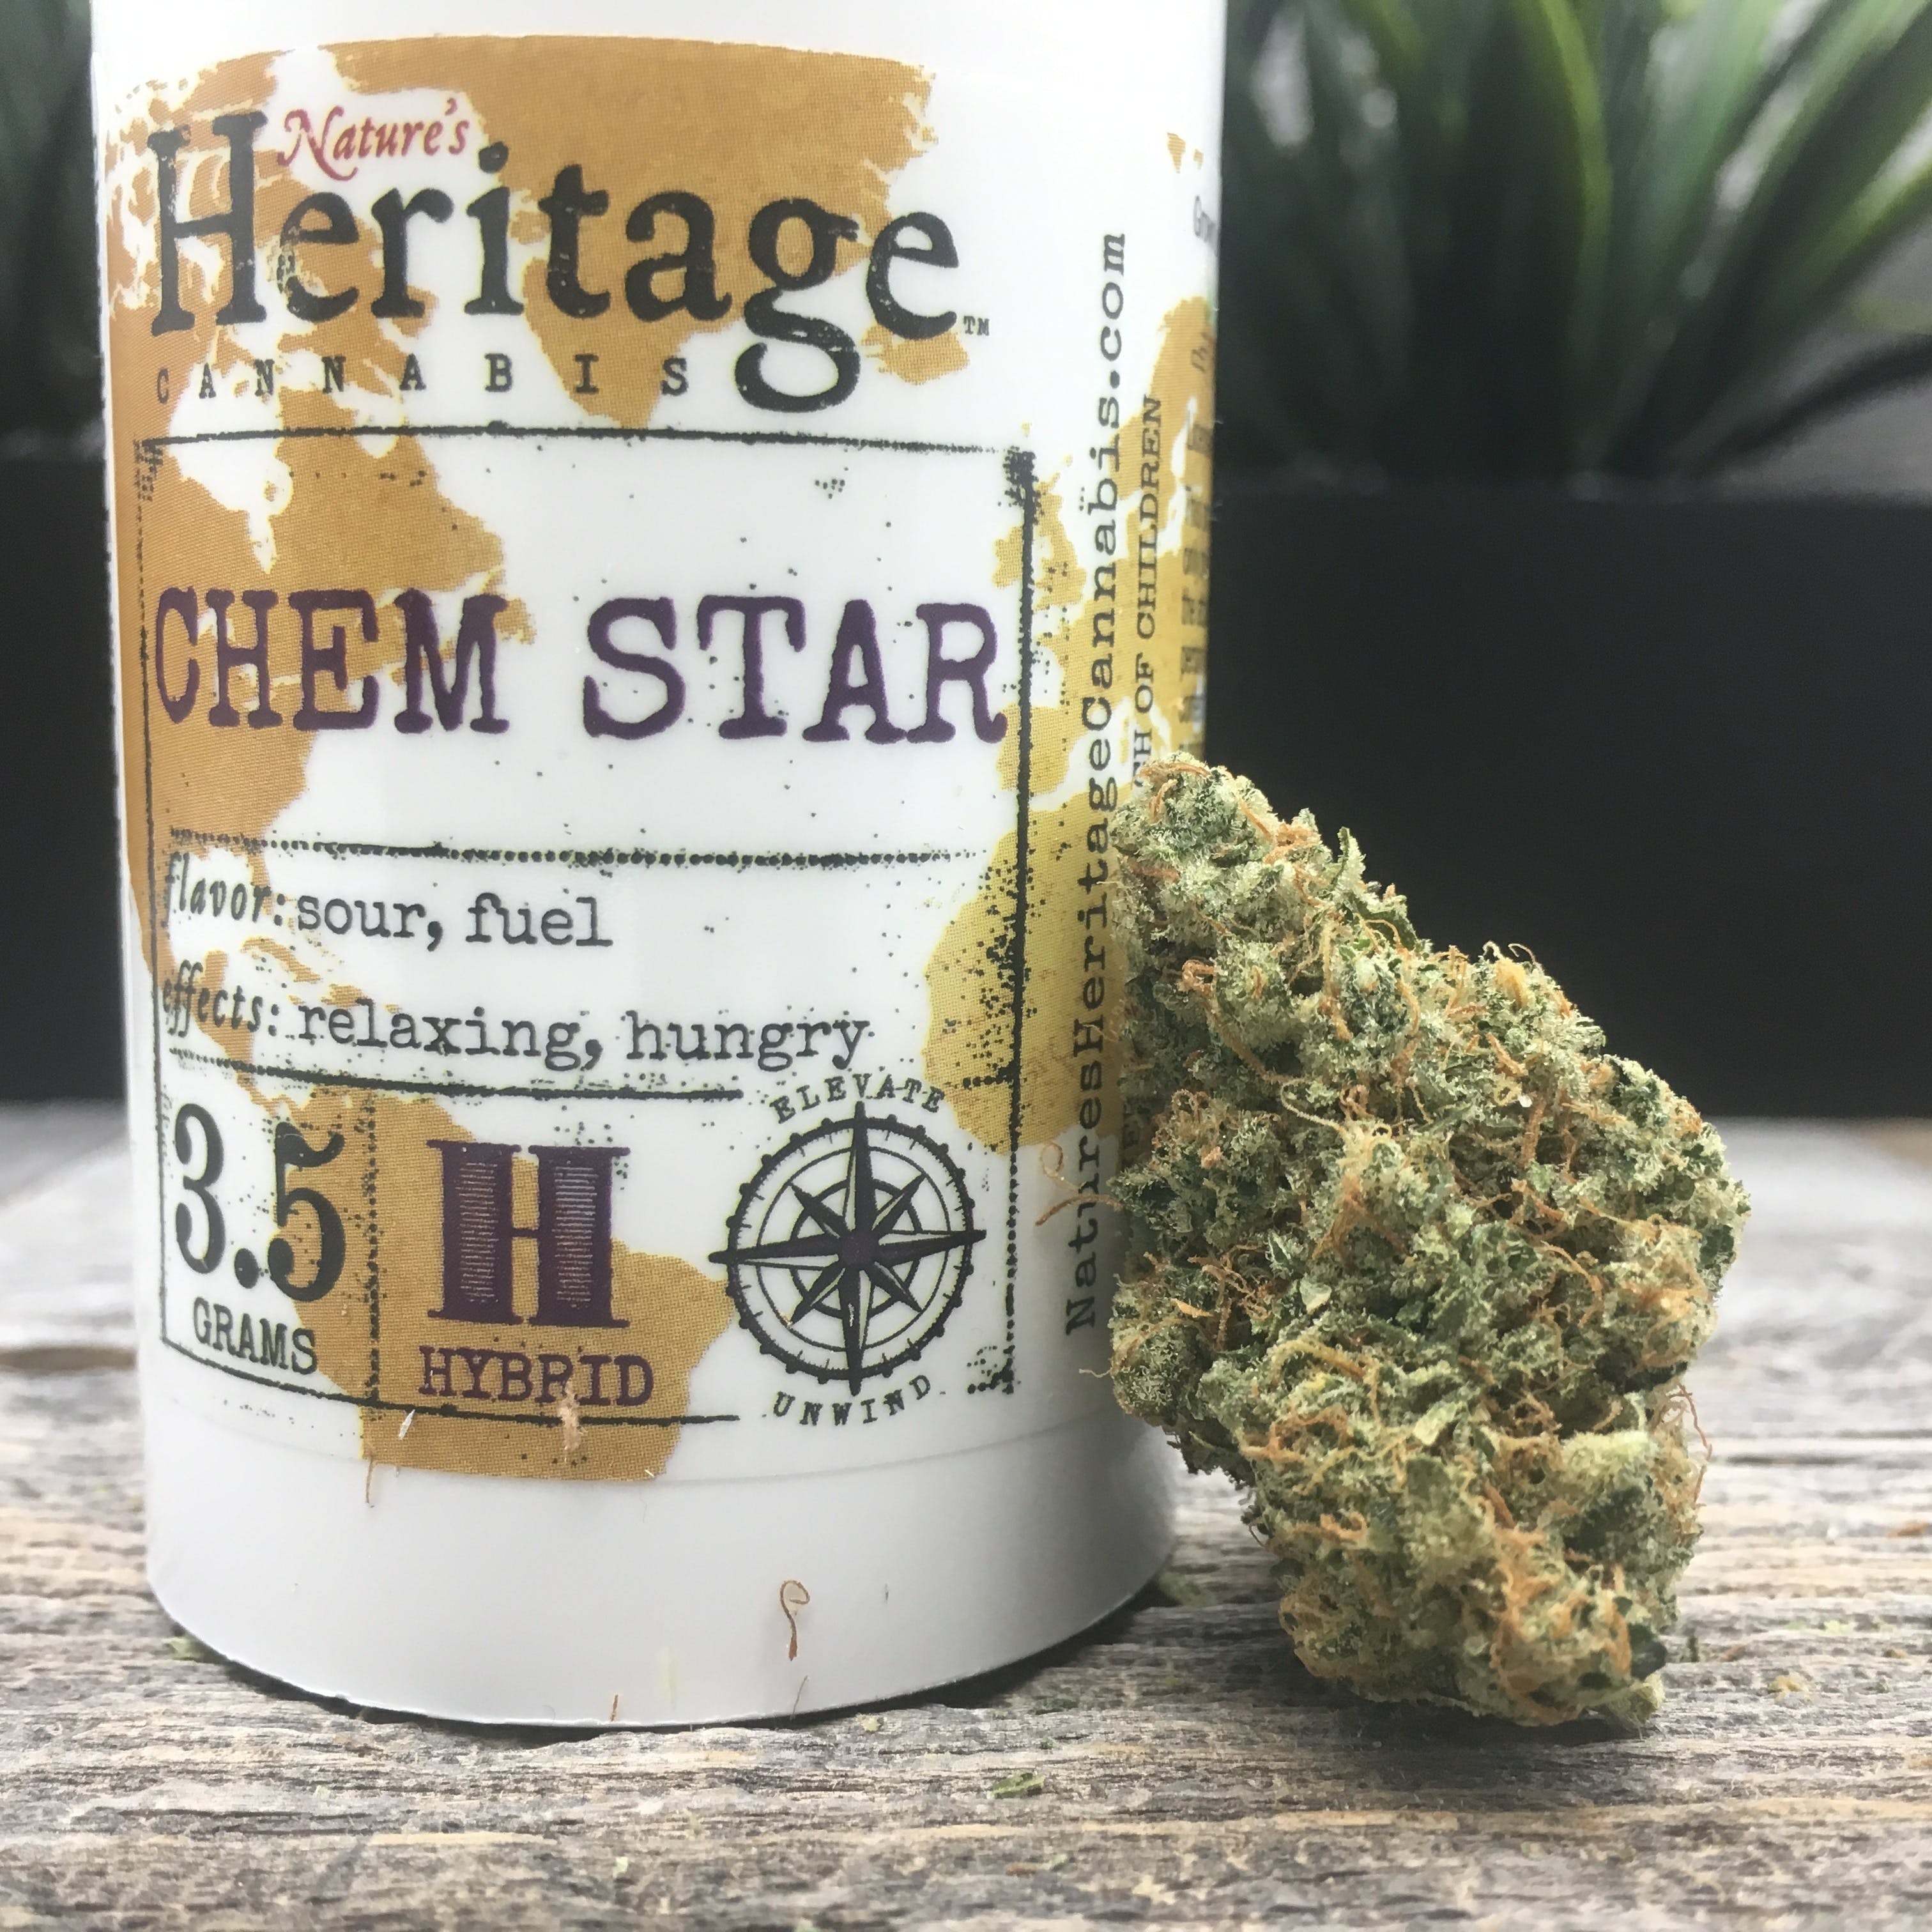 Chem Star by Nature's Heritage